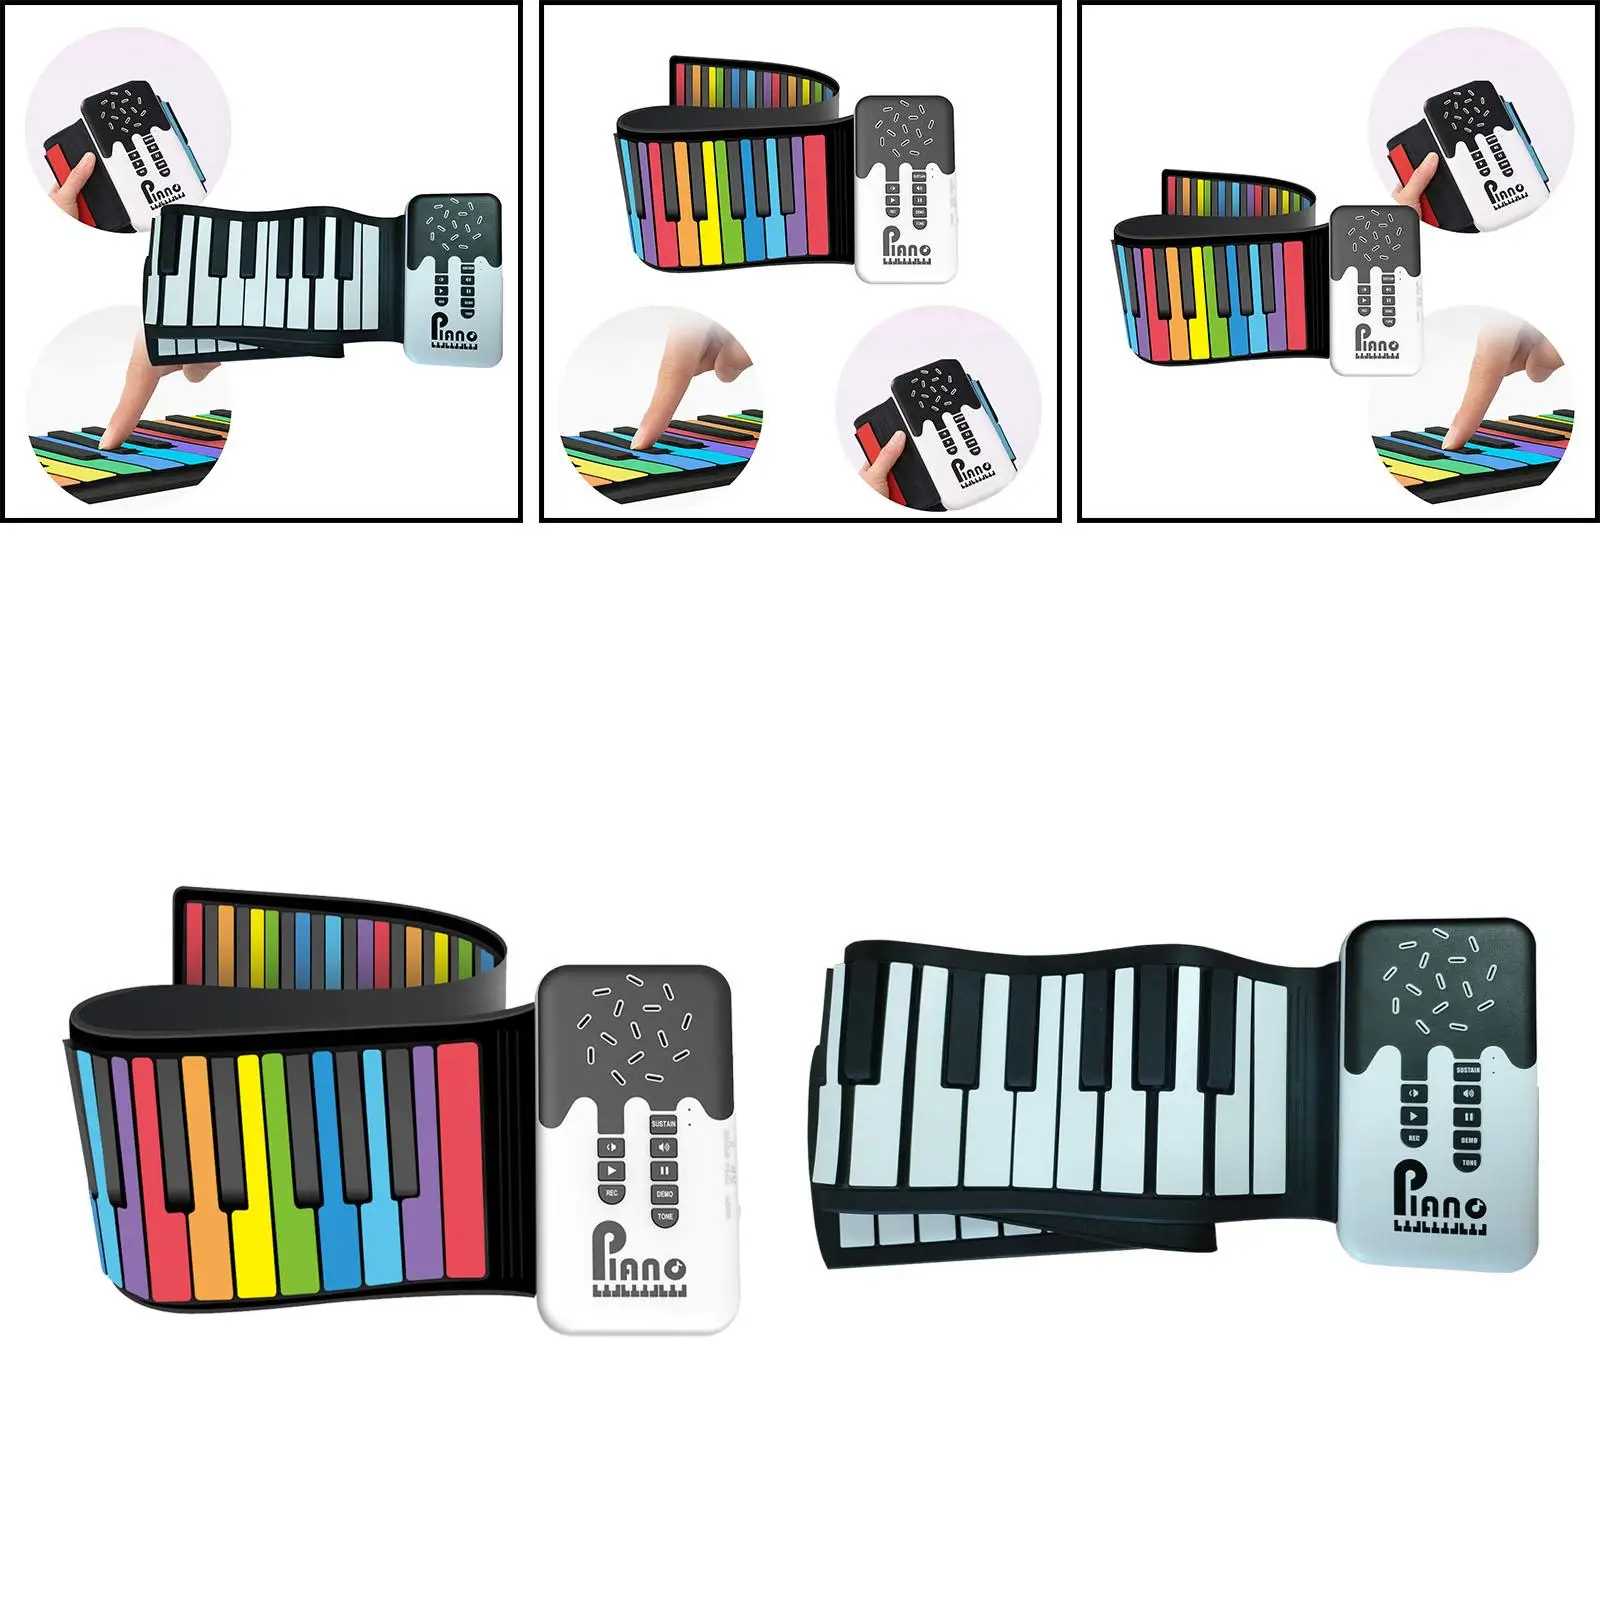 

49 Keys Roll up Piano Silicone Rechargeable Lightweight Sturdy Travel Piano Portable Piano for Beginner Children Kids Adults